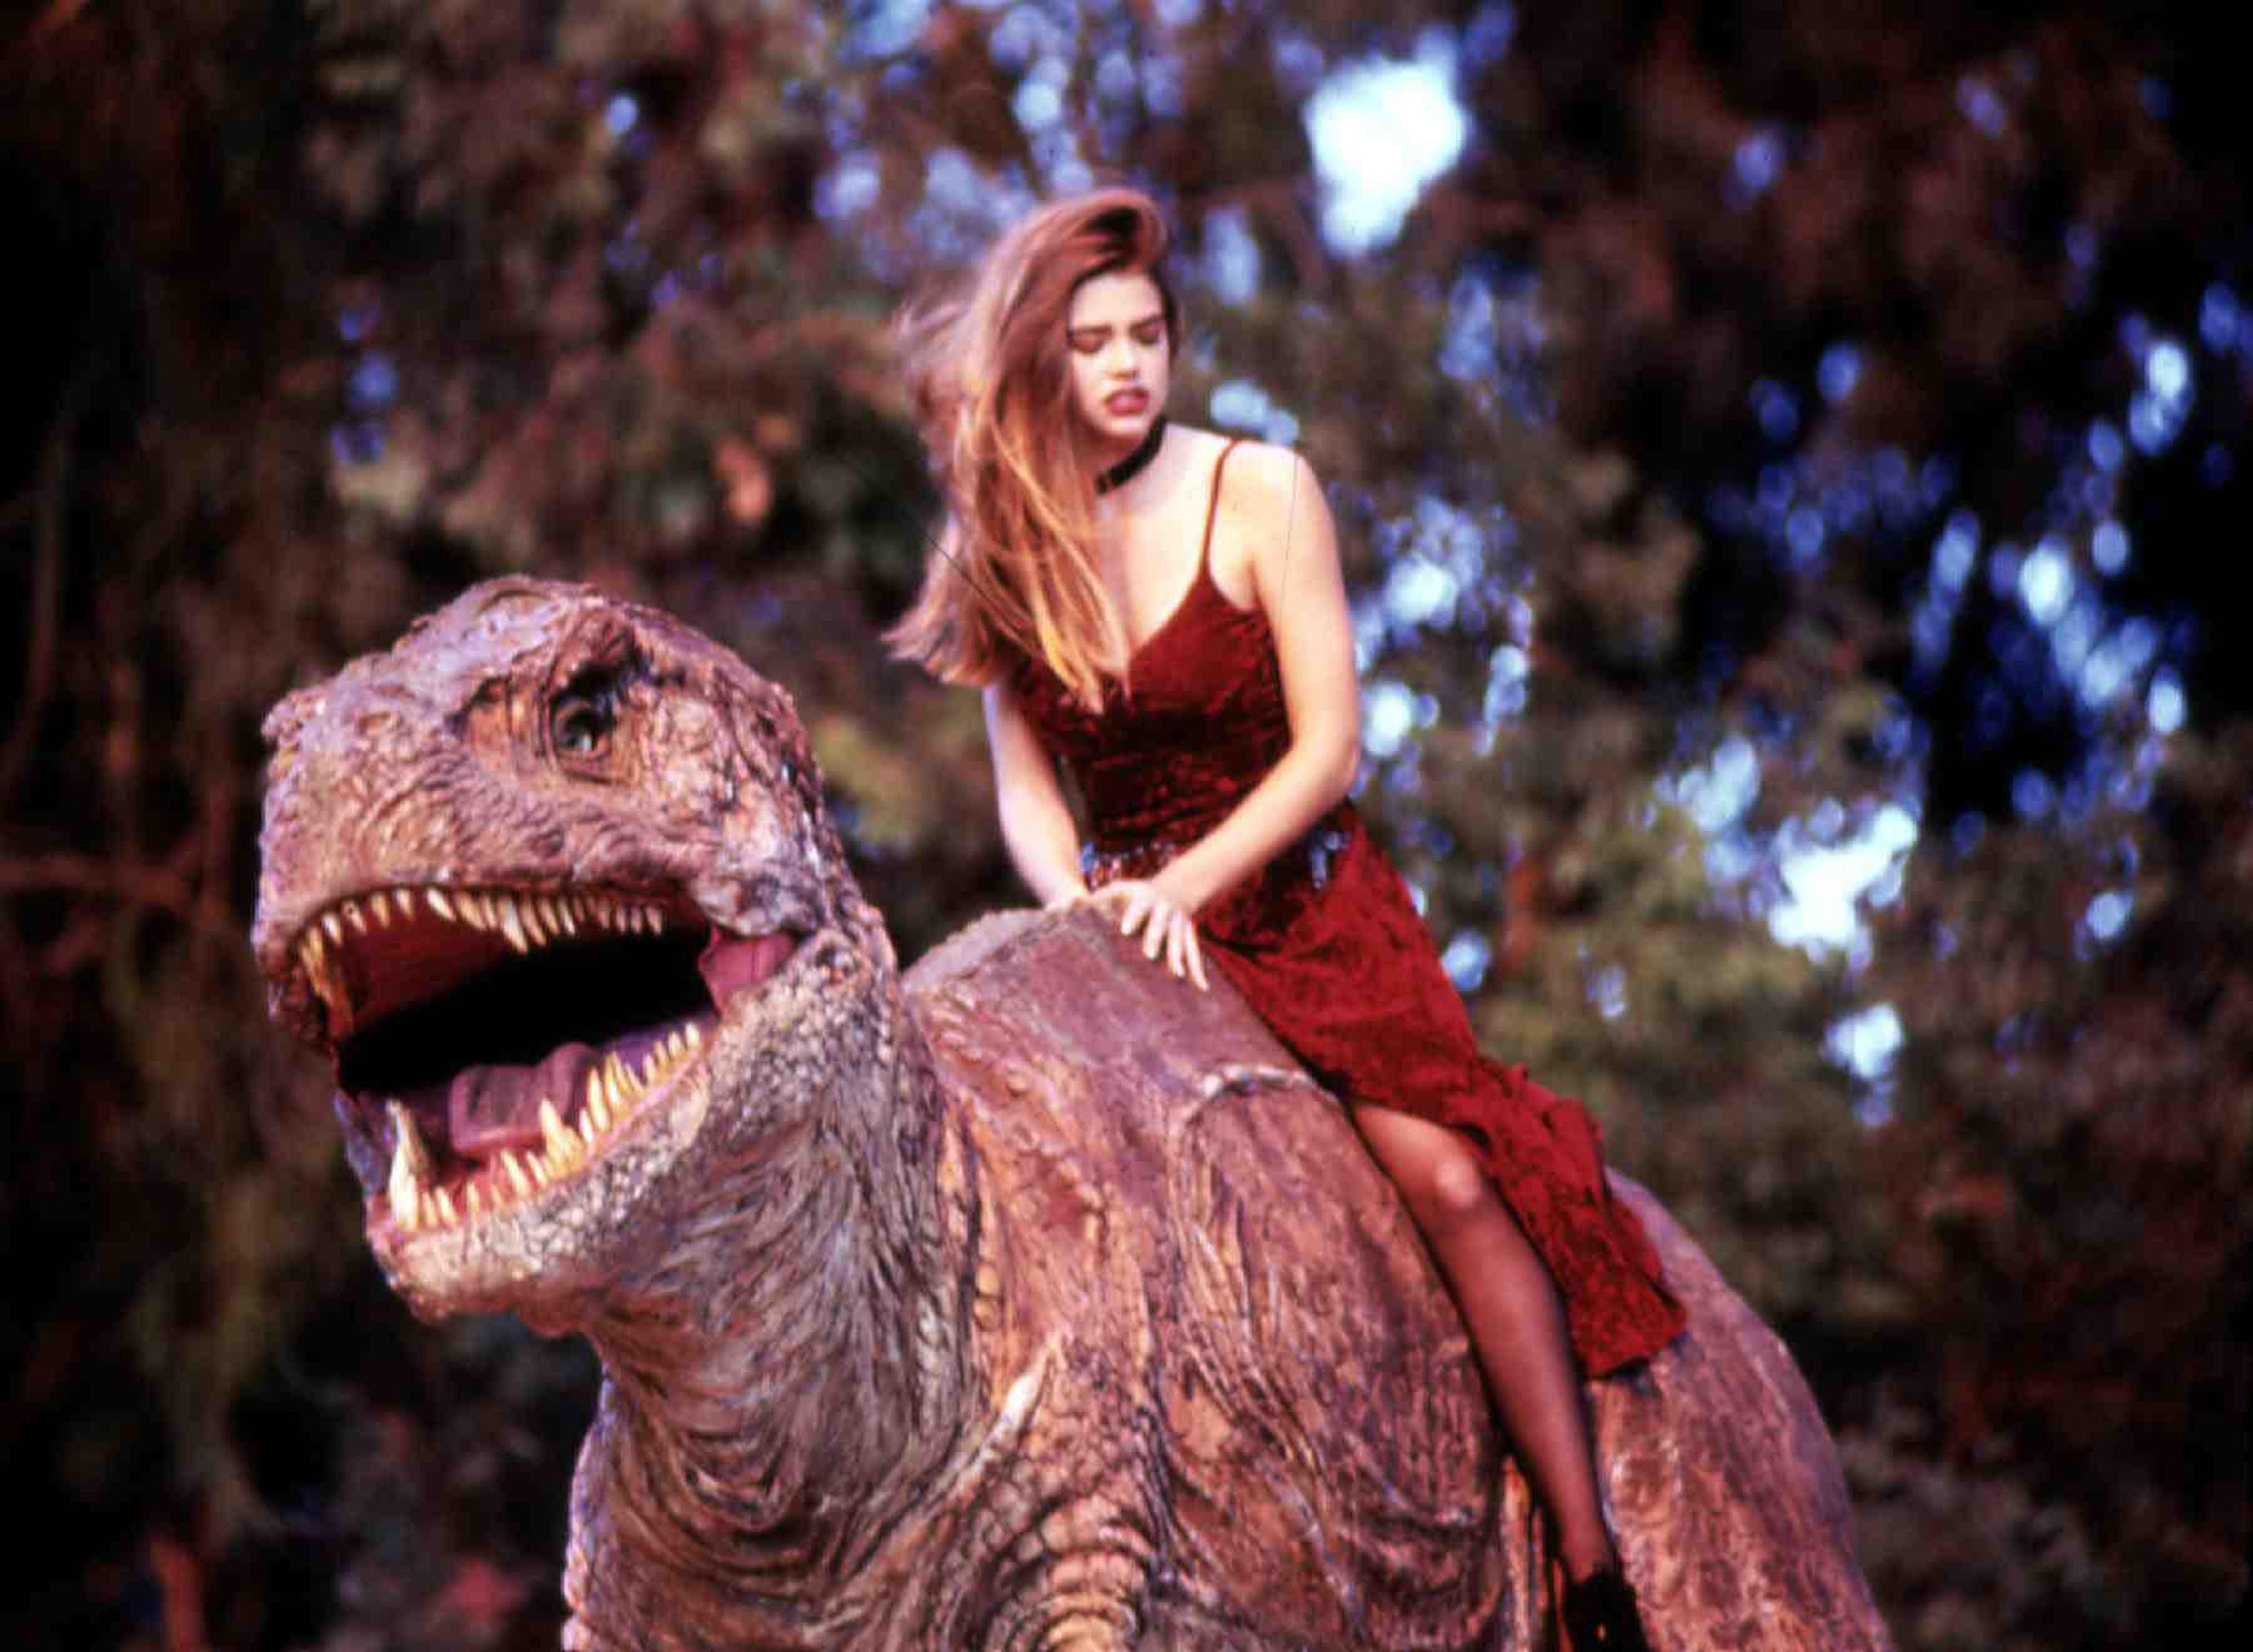 A young Denise Richards in a red dress rides a T-rex